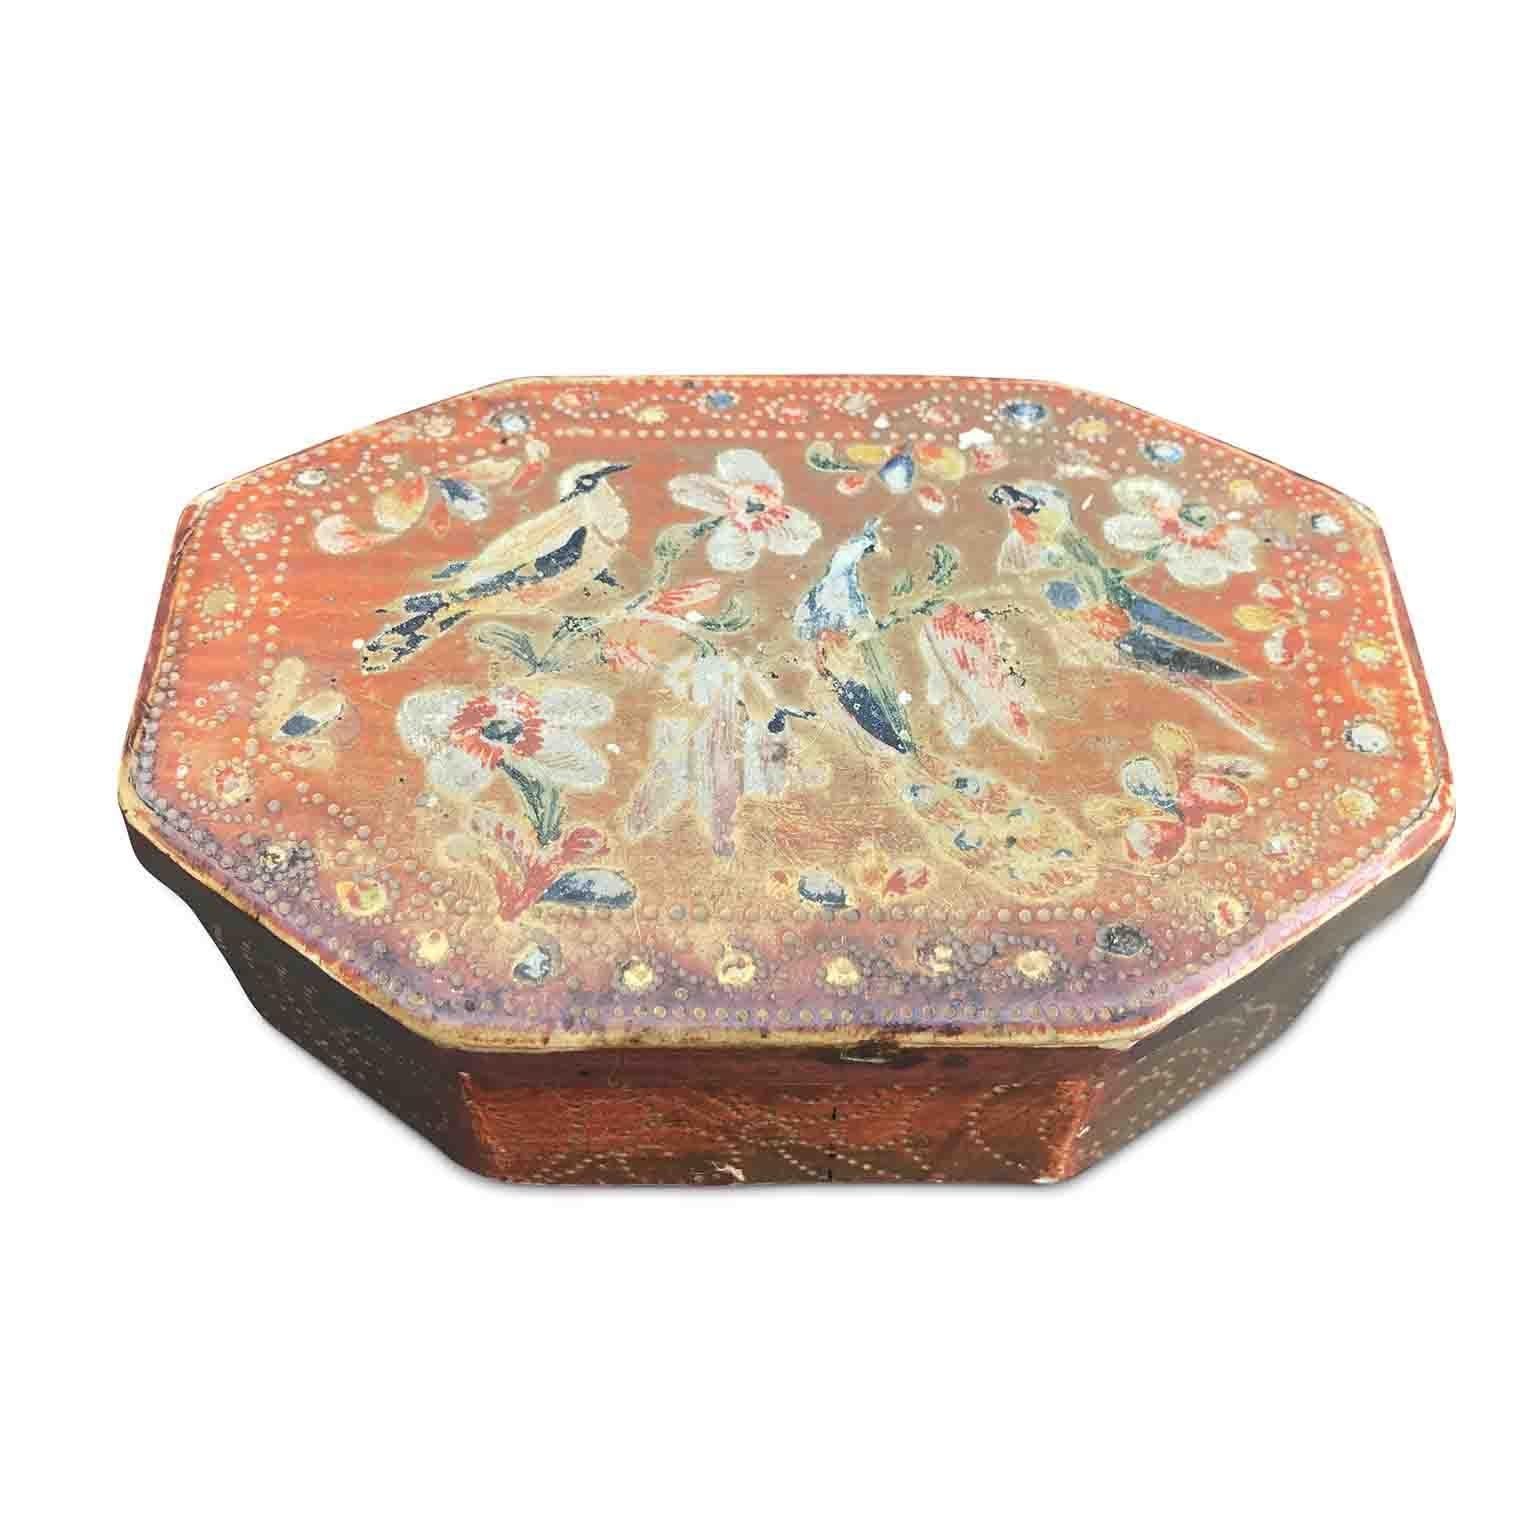 Italian antique gilded Florentine box, octagonal shape realized in white walnut, engraved on each side and the top and with polychrome birds lacquered on the lid. The box dates back to the last quarter of 18th century, is in fair condition, with